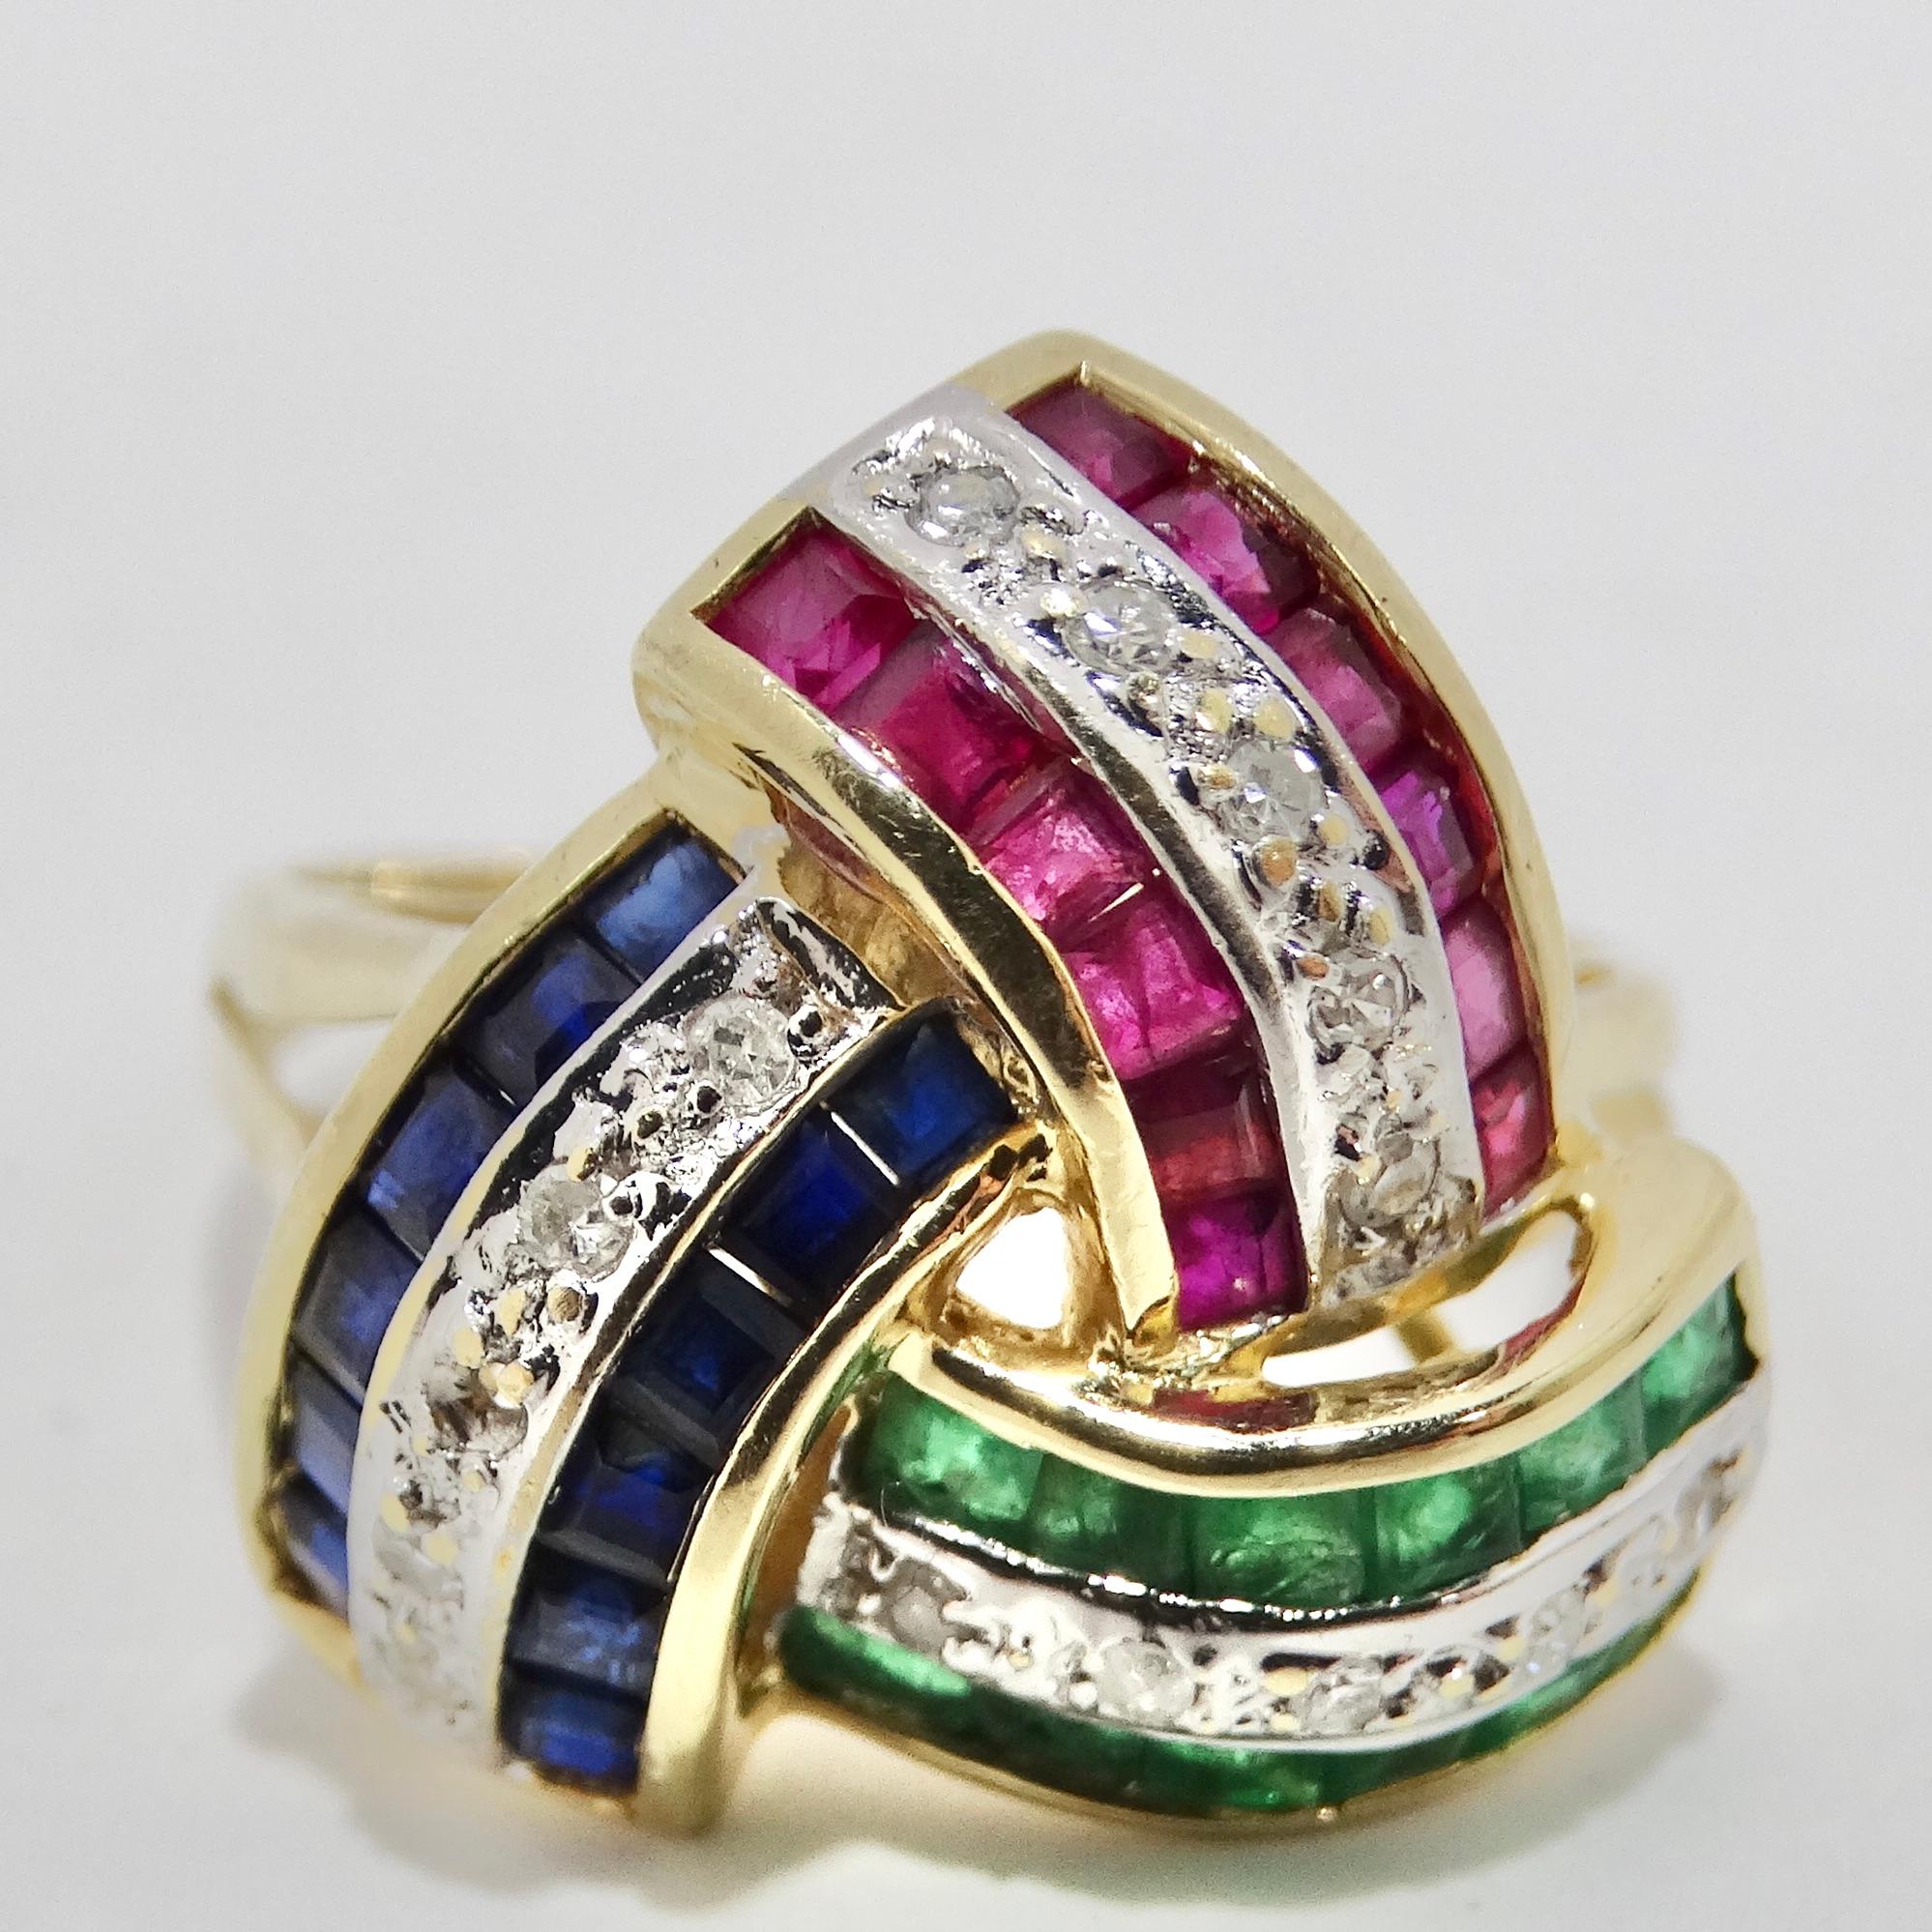 Introducing the David Webb Inspired Sapphire, Ruby, Emerald, and Diamond 1960s Ring, a magnificent piece that exudes timeless glamour and captures the essence of vintage luxury. This stunning ring features a selection of exquisite gemstones - red